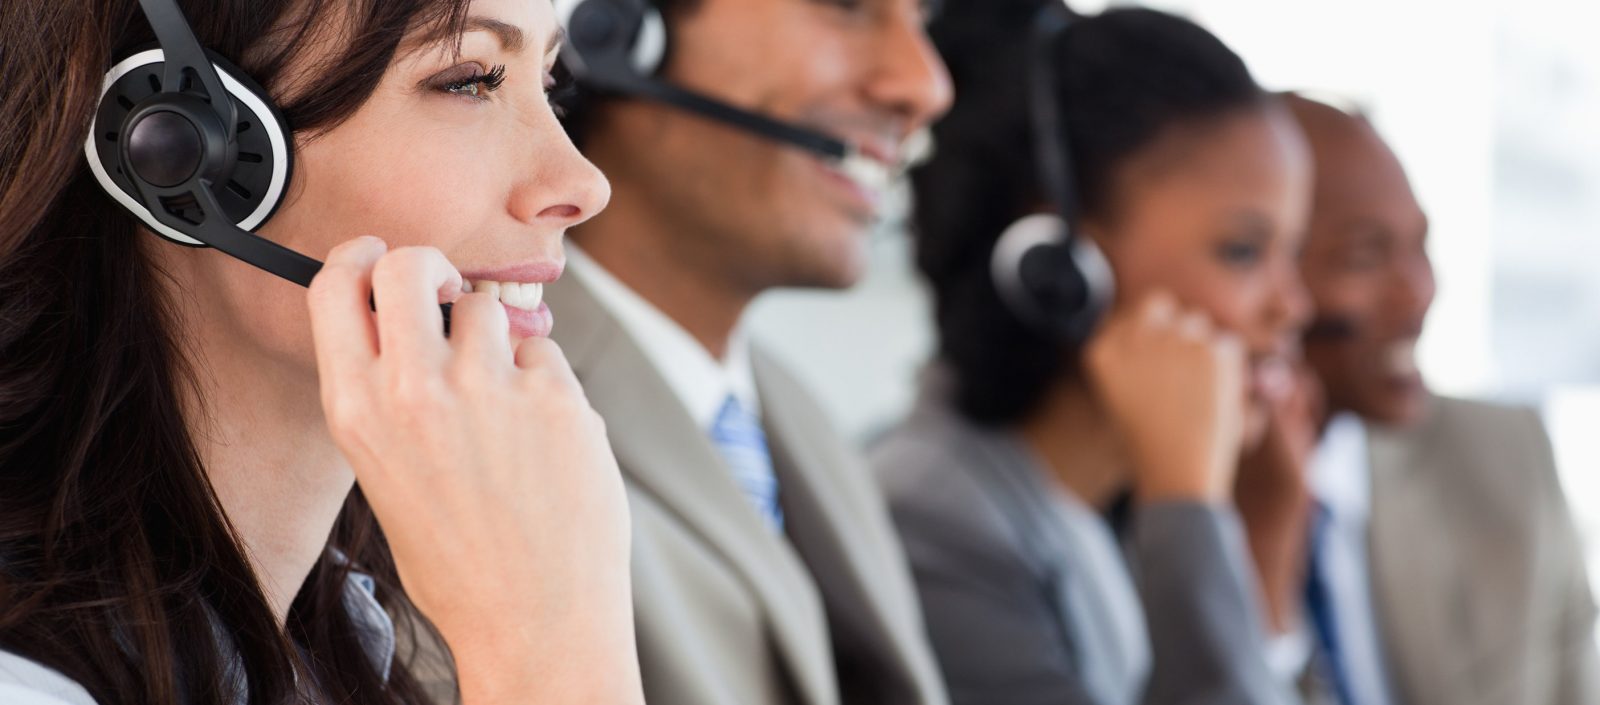 How do you keep your customers happy over the phone?